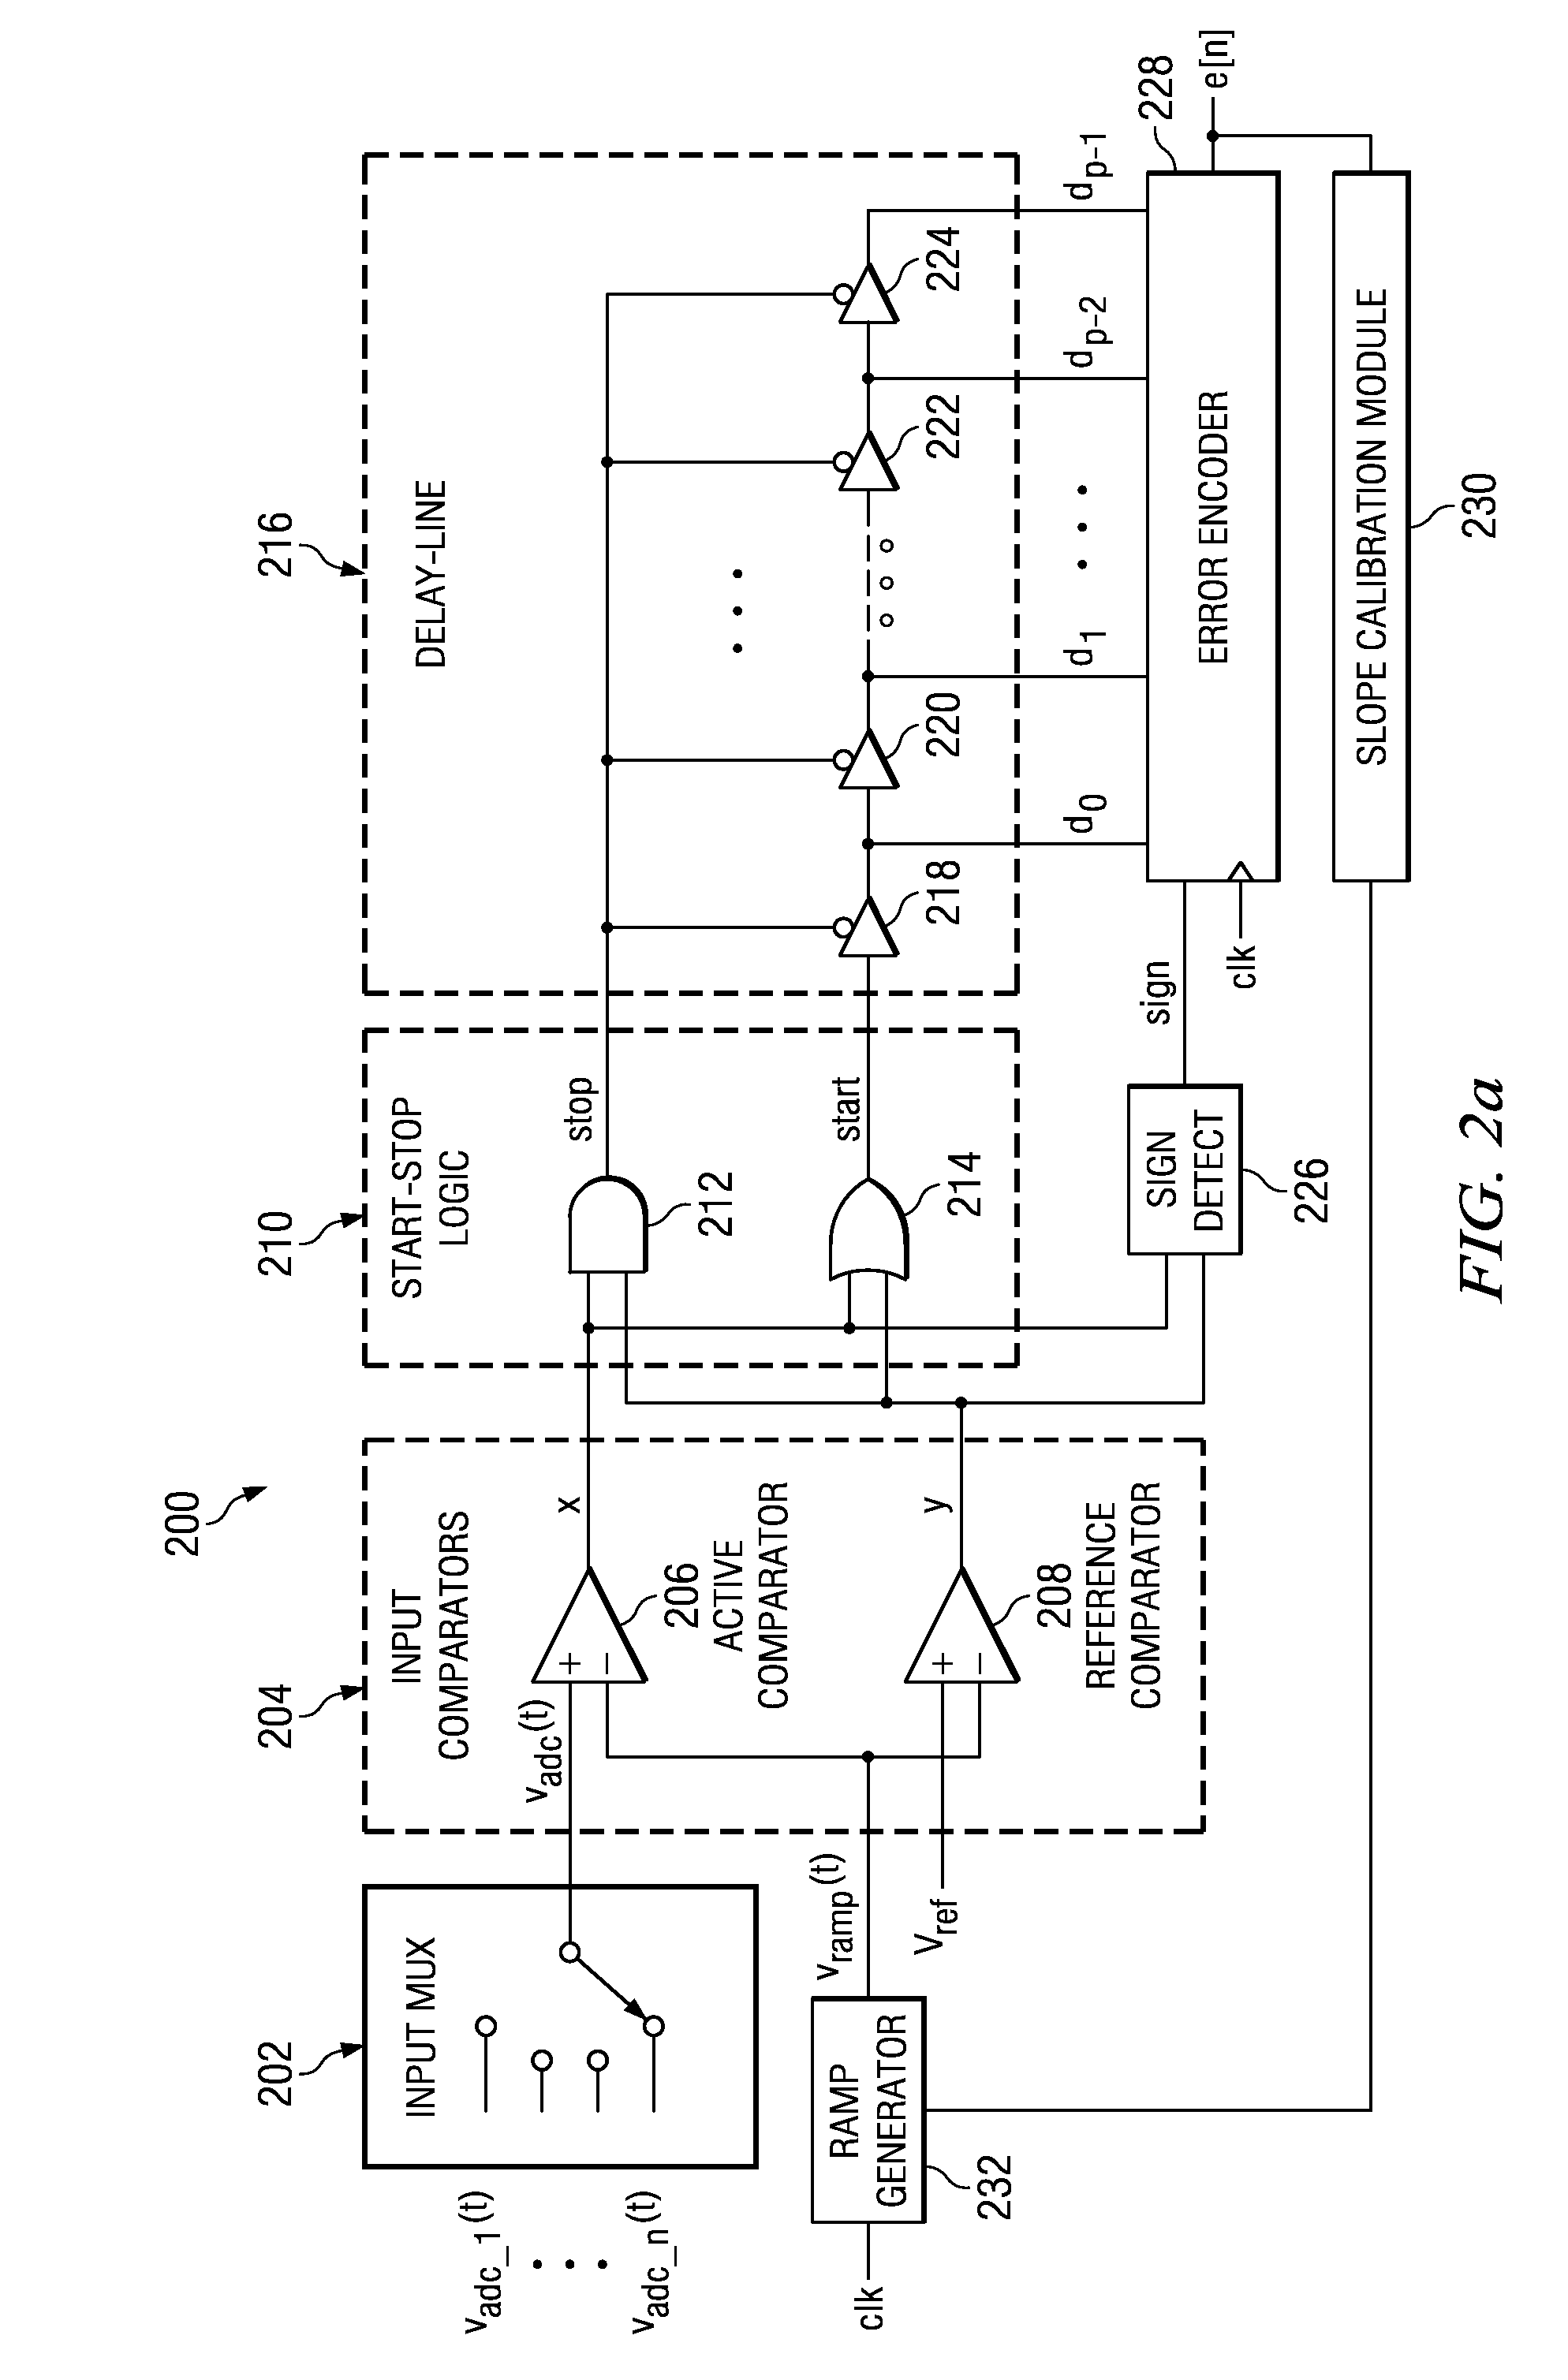 System and method for a/d conversion